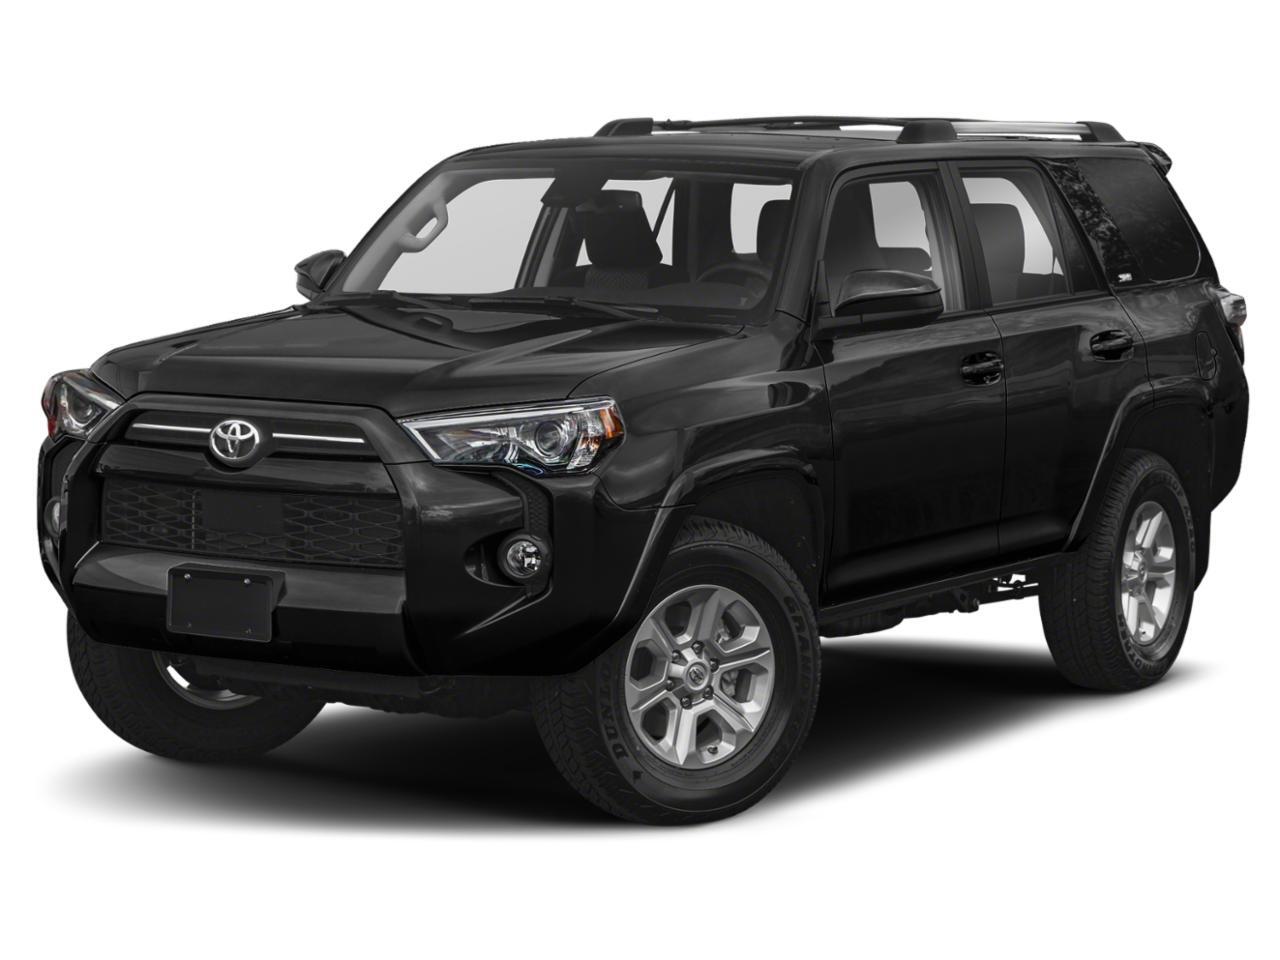 2022 Toyota 4Runner - SR5| 7 PASS| HEATED LEATHER SEATS| REAR CAM